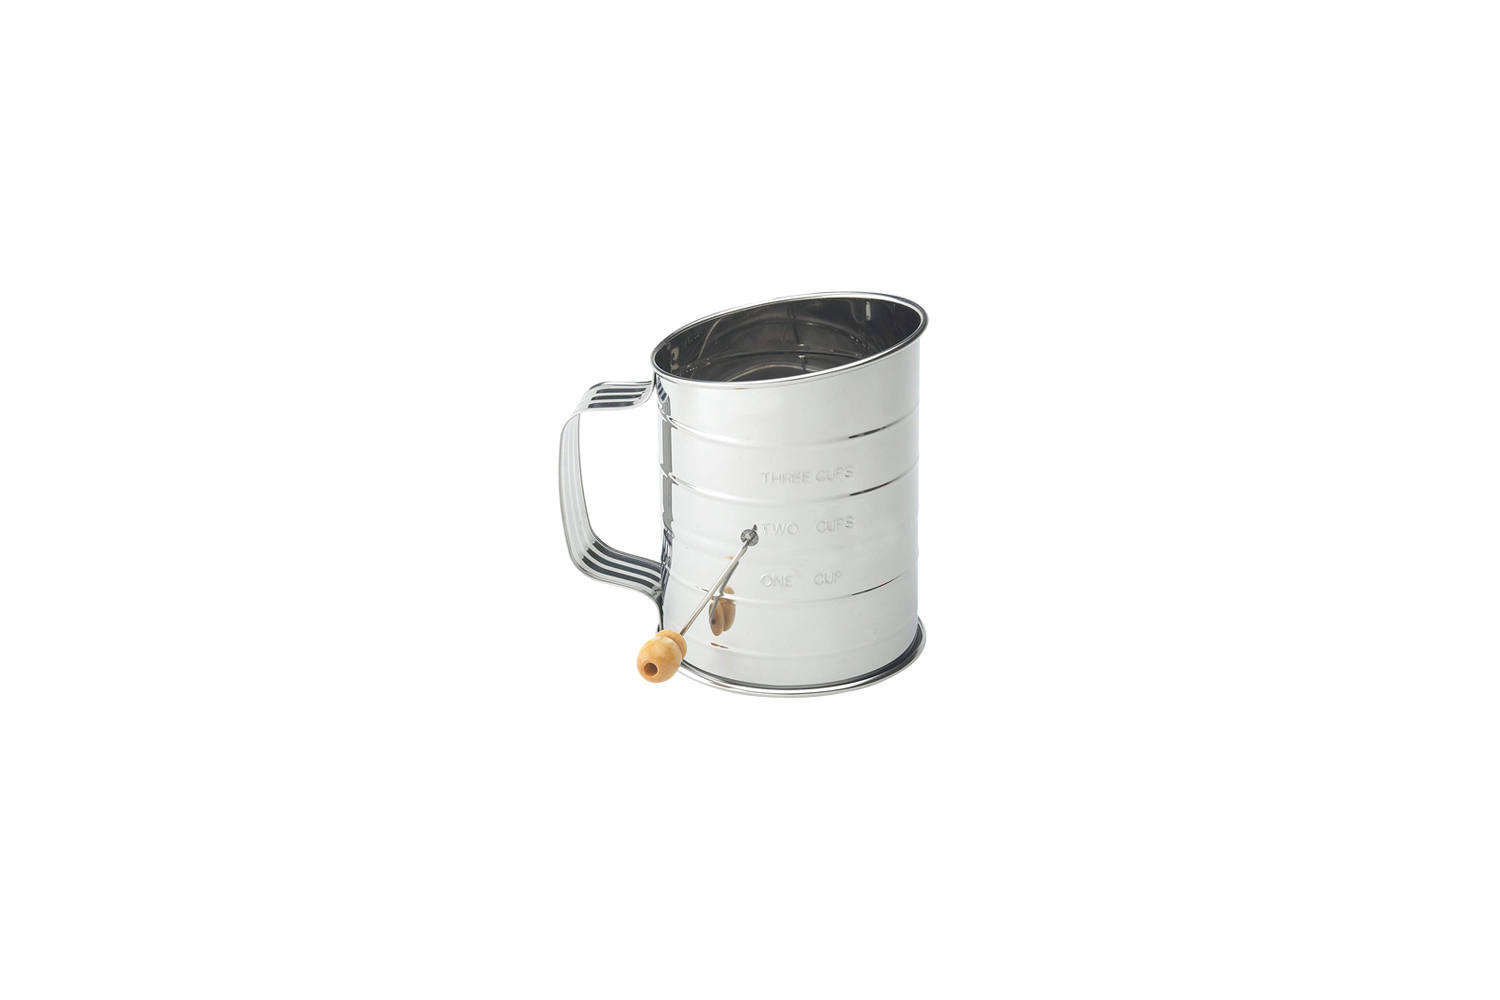 Williams Sonoma Flour Sifter, Baking Tools